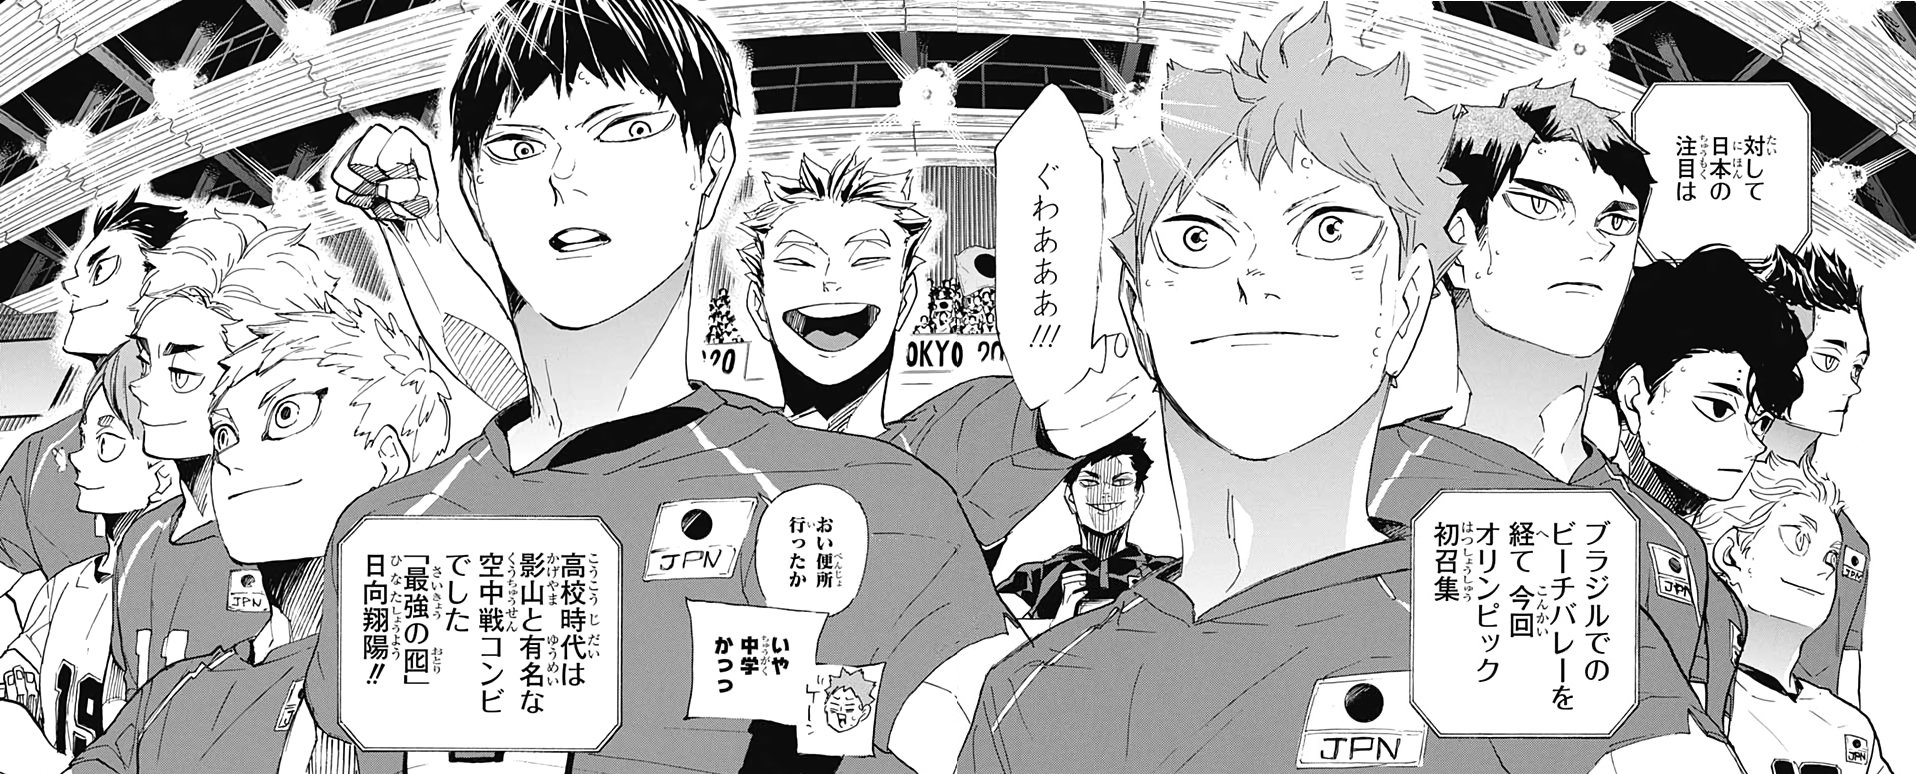 Volleyball anime Haikyu!! getting ready to serve fans with live stage show  this year | SoraNews24 -Japan News-